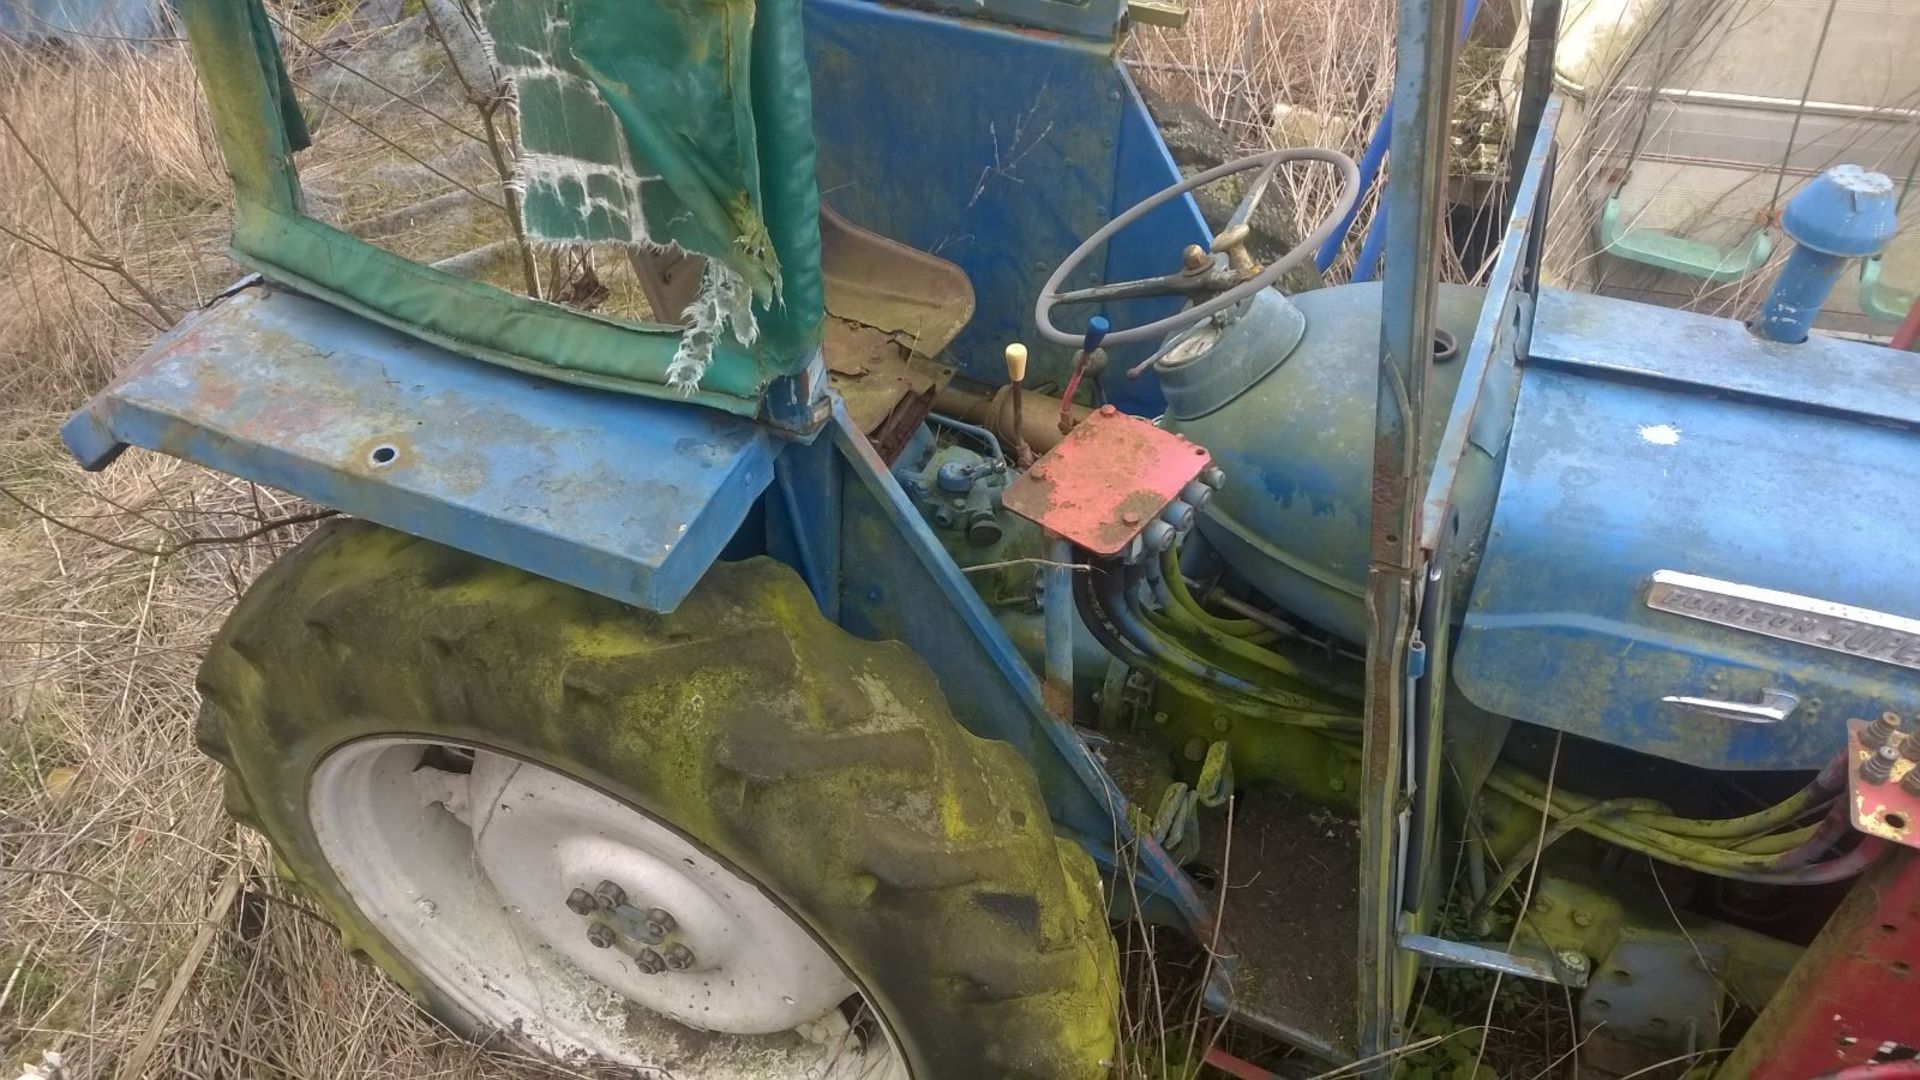 FORDSON  SUPER MAJOR c/w POWER LOADER   WE HAVENT HEARD IT RUNNING YET BUT WE ARE INTENDING TO GET - Image 3 of 20